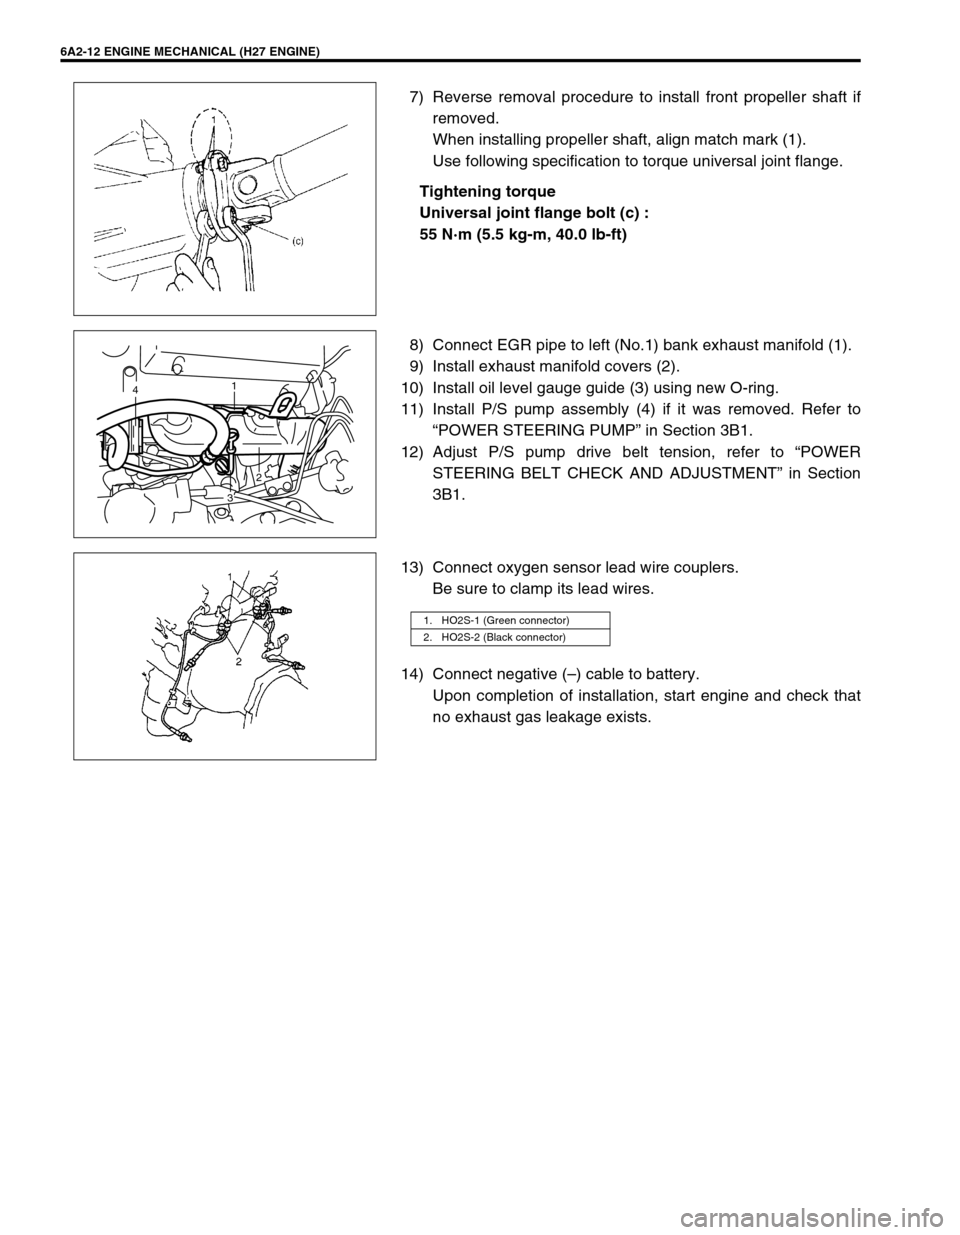 SUZUKI GRAND VITARA 1999 2.G Owners Guide 6A2-12 ENGINE MECHANICAL (H27 ENGINE)
7) Reverse removal procedure to install front propeller shaft if
removed.
When installing propeller shaft, align match mark (1).
Use following specification to to